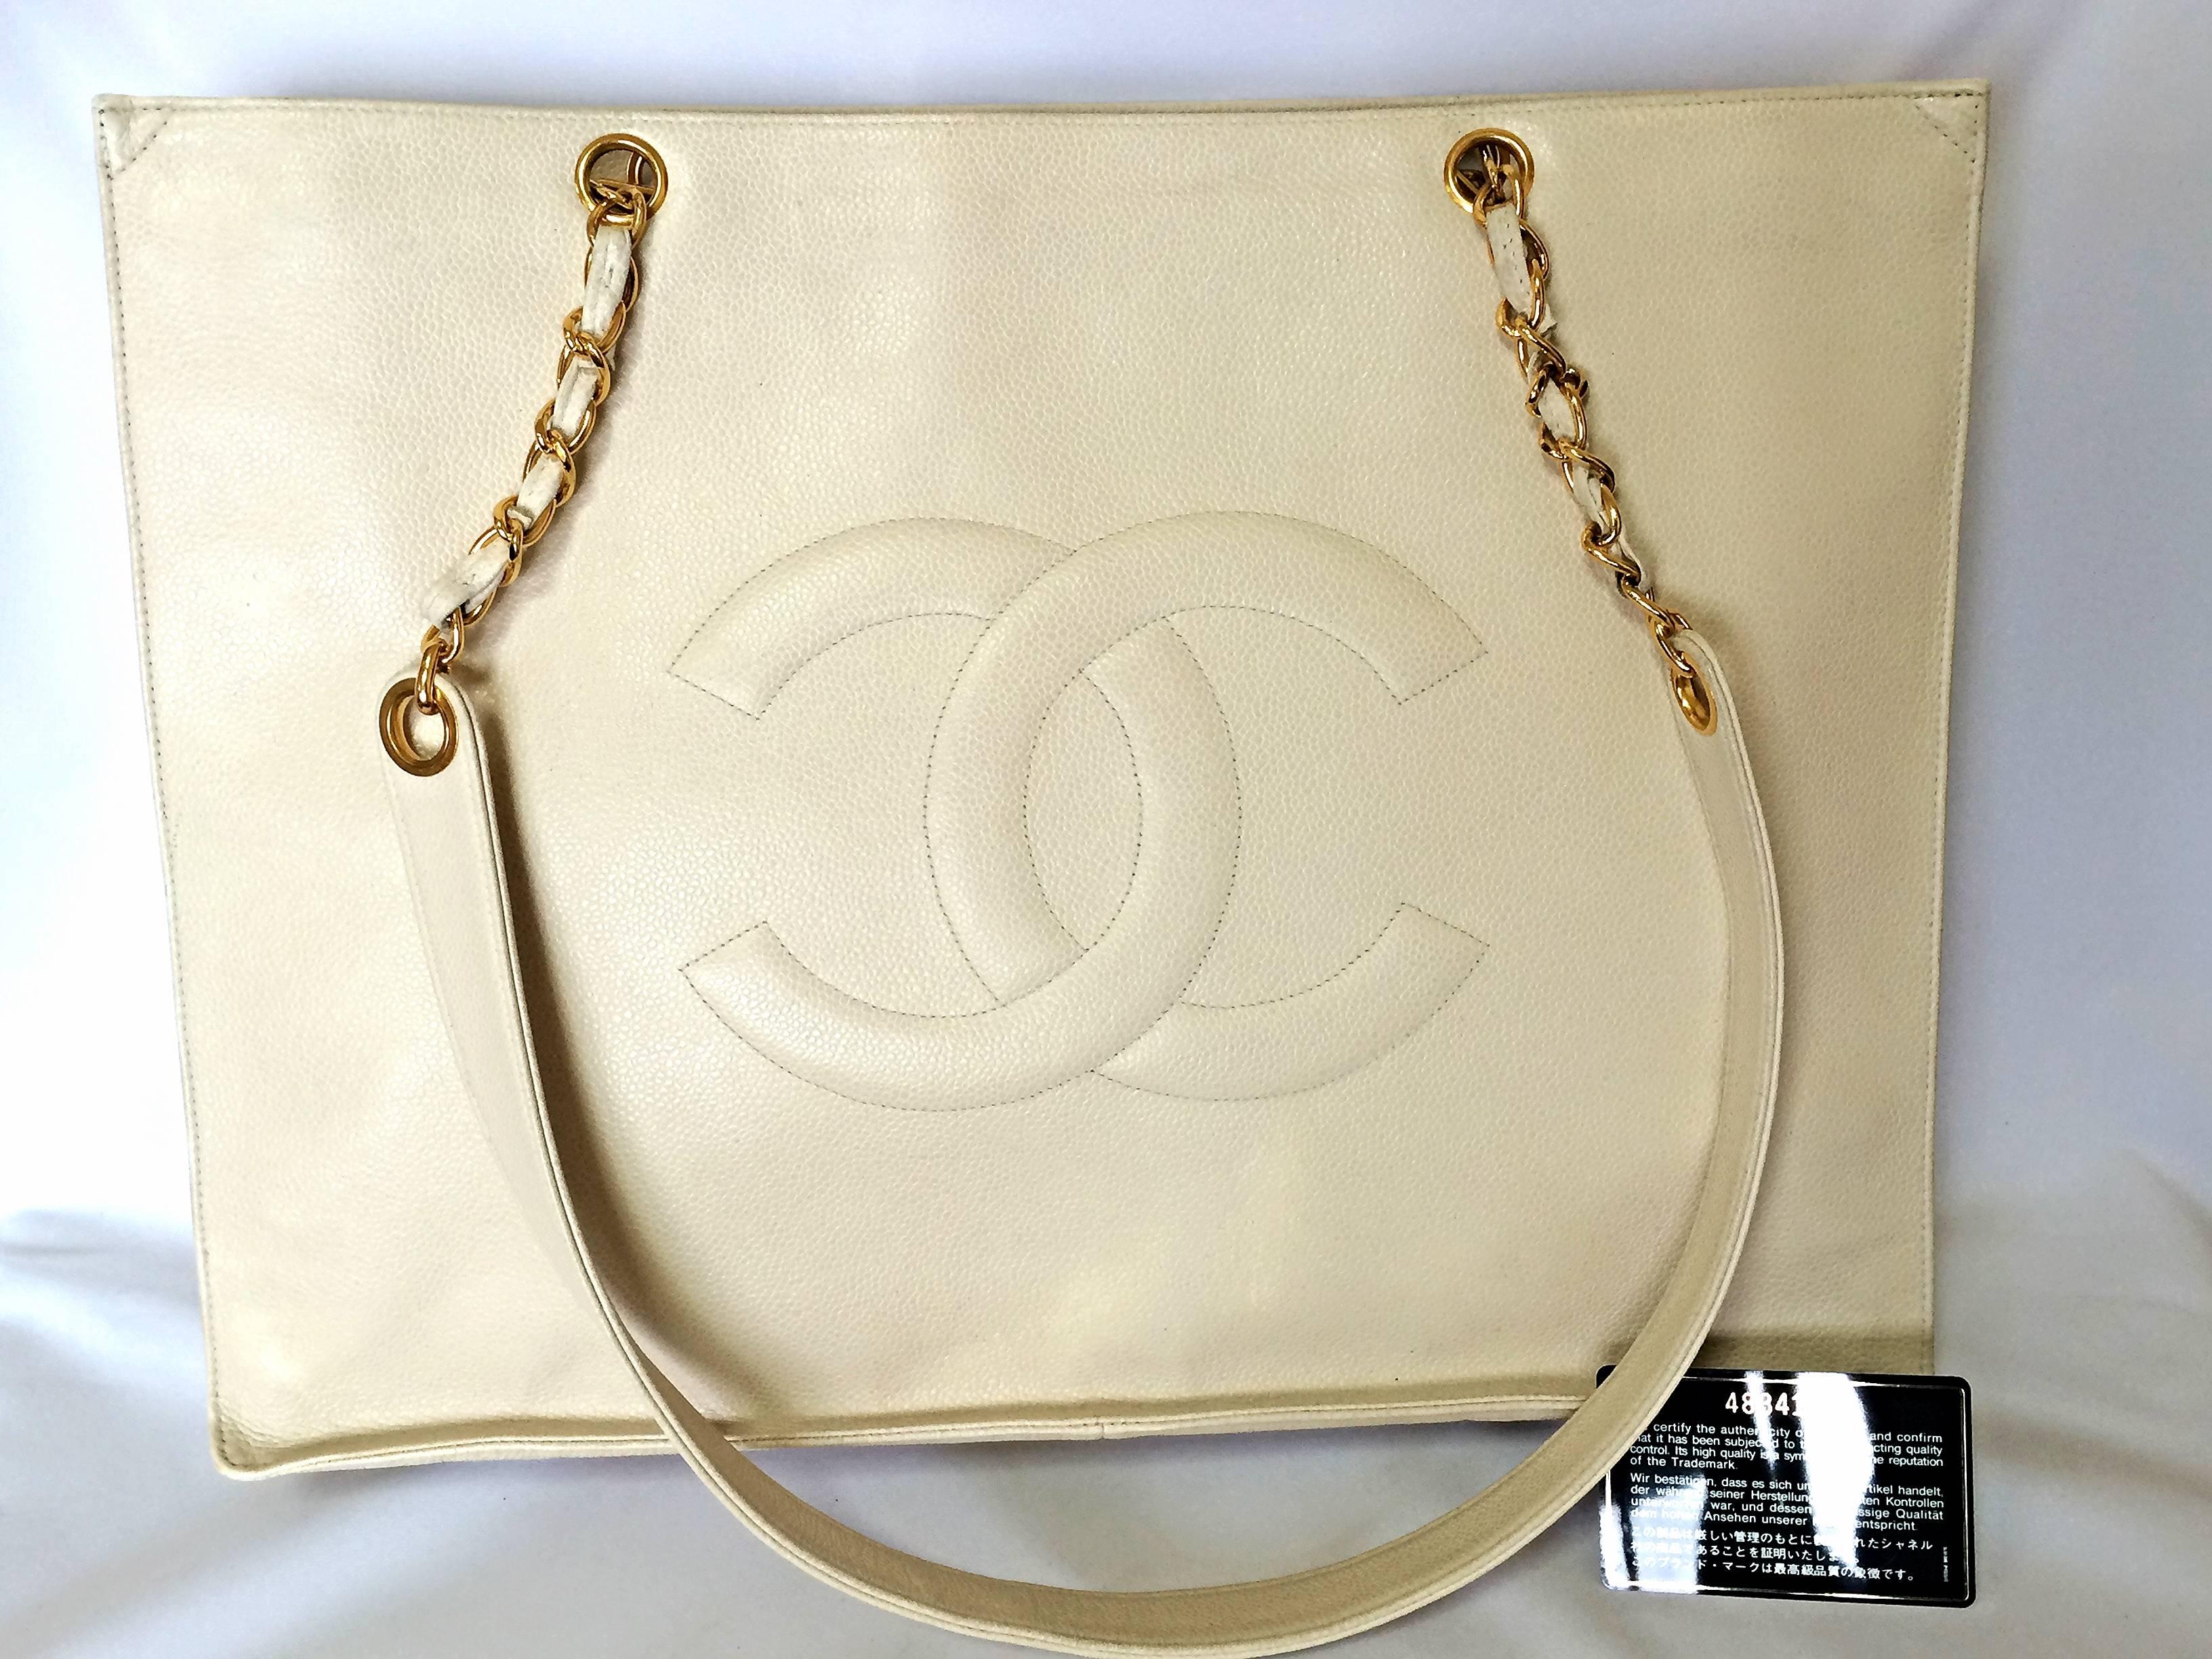 1990s. Vintage CHANEL ivory white color caviar leather large tote bag, shopper with gold-tone chains and large CC stitch mark. Perfect daily bag.

Vintage CHANEL ivory white color caviar leather chain shoulder large tote bag with gold-tone chain